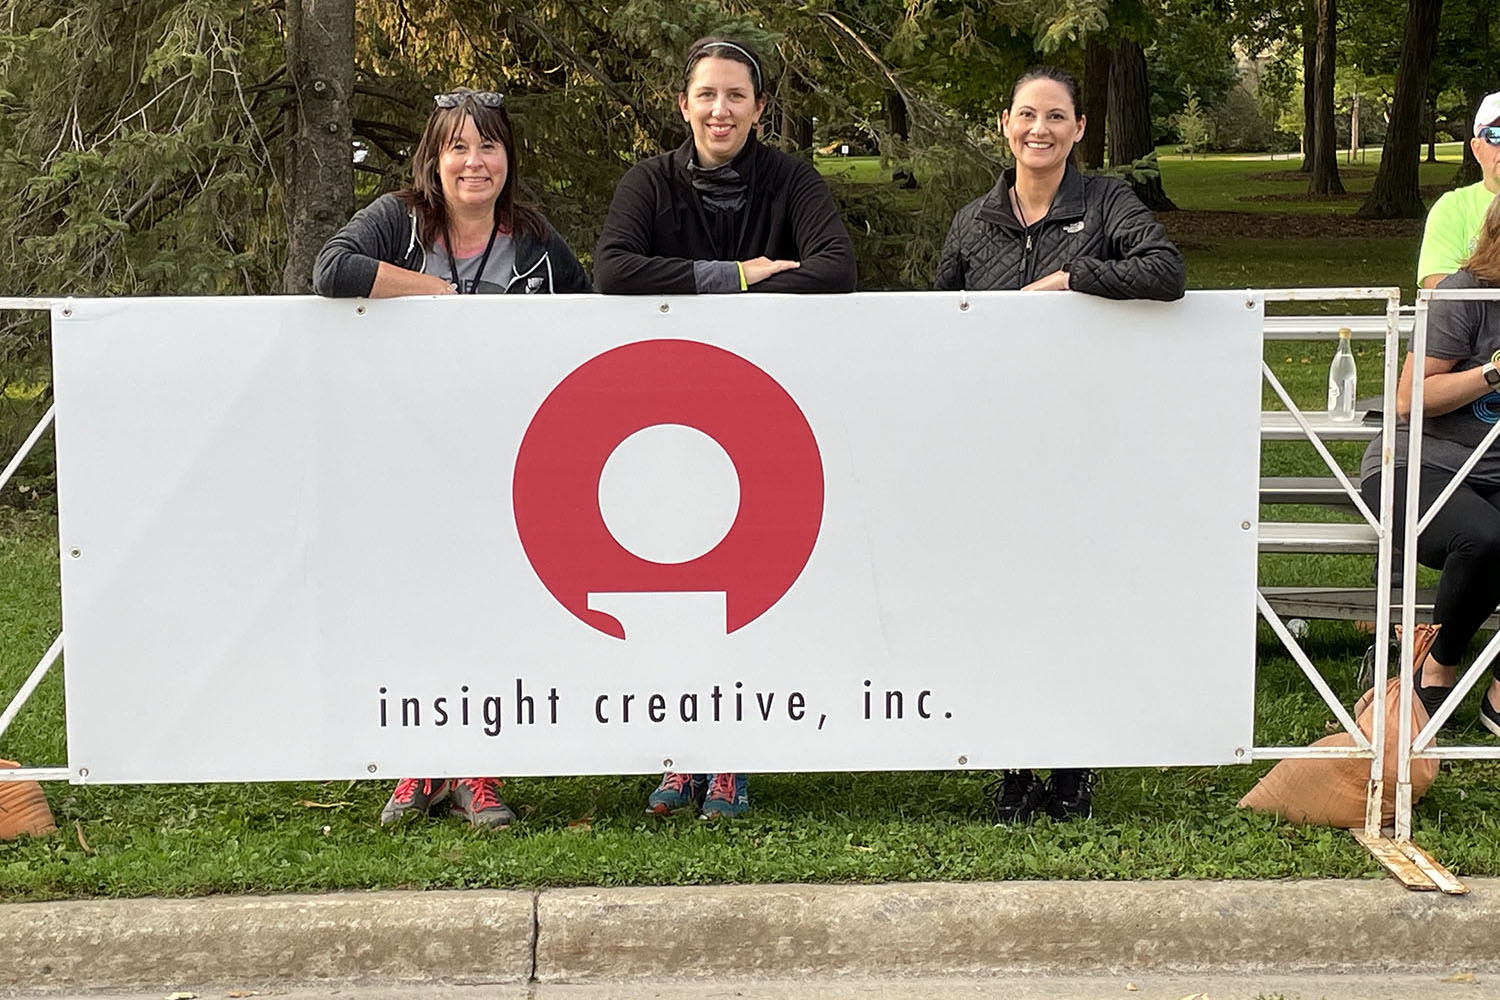 Insight Creative event marketing team standing behind the Insight Creative sign at the Fox Cities Marathon